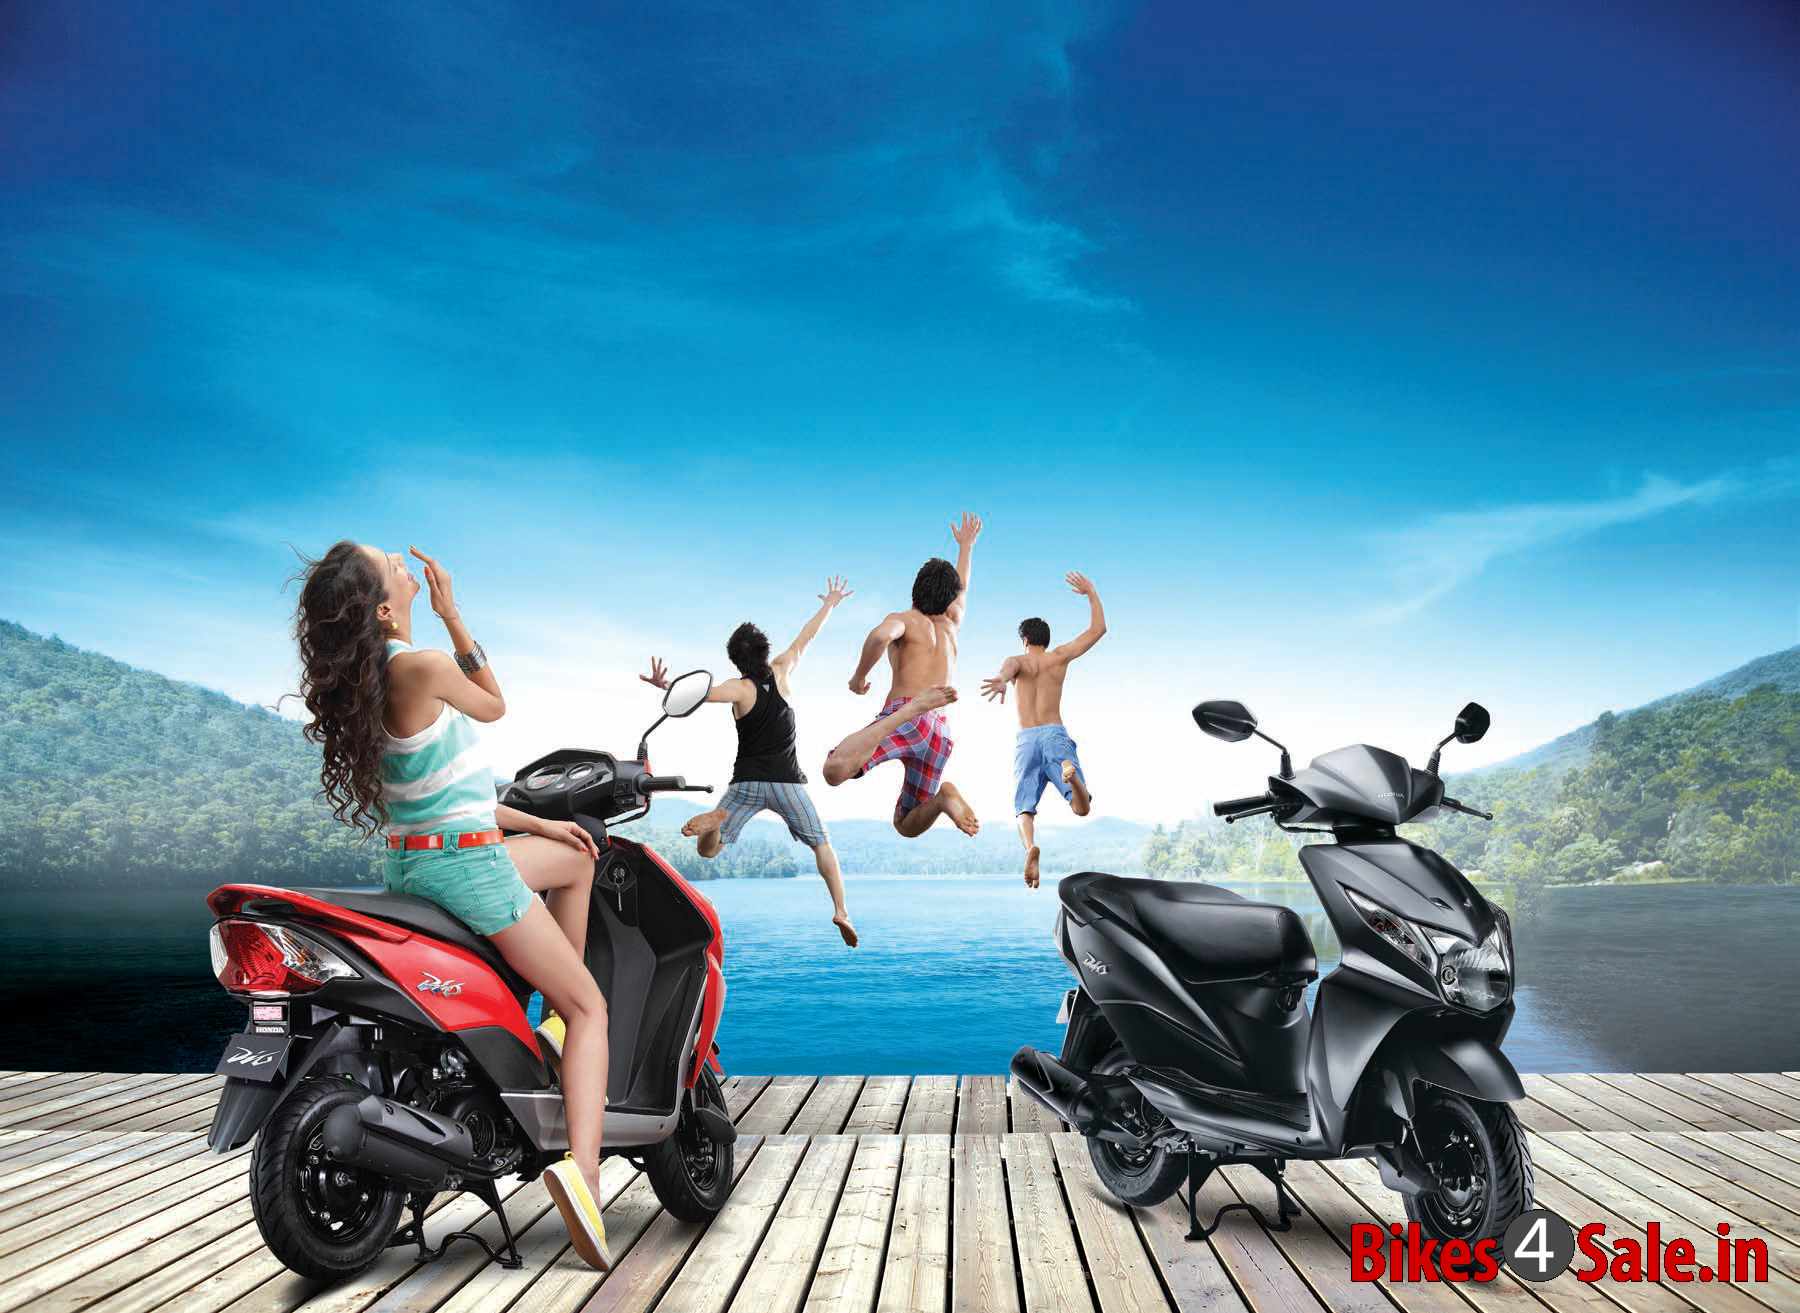 Honda Dio - Zoom off where your heart takes you. Go further than your imagination. Cross the limits of the ordinary. Overtake